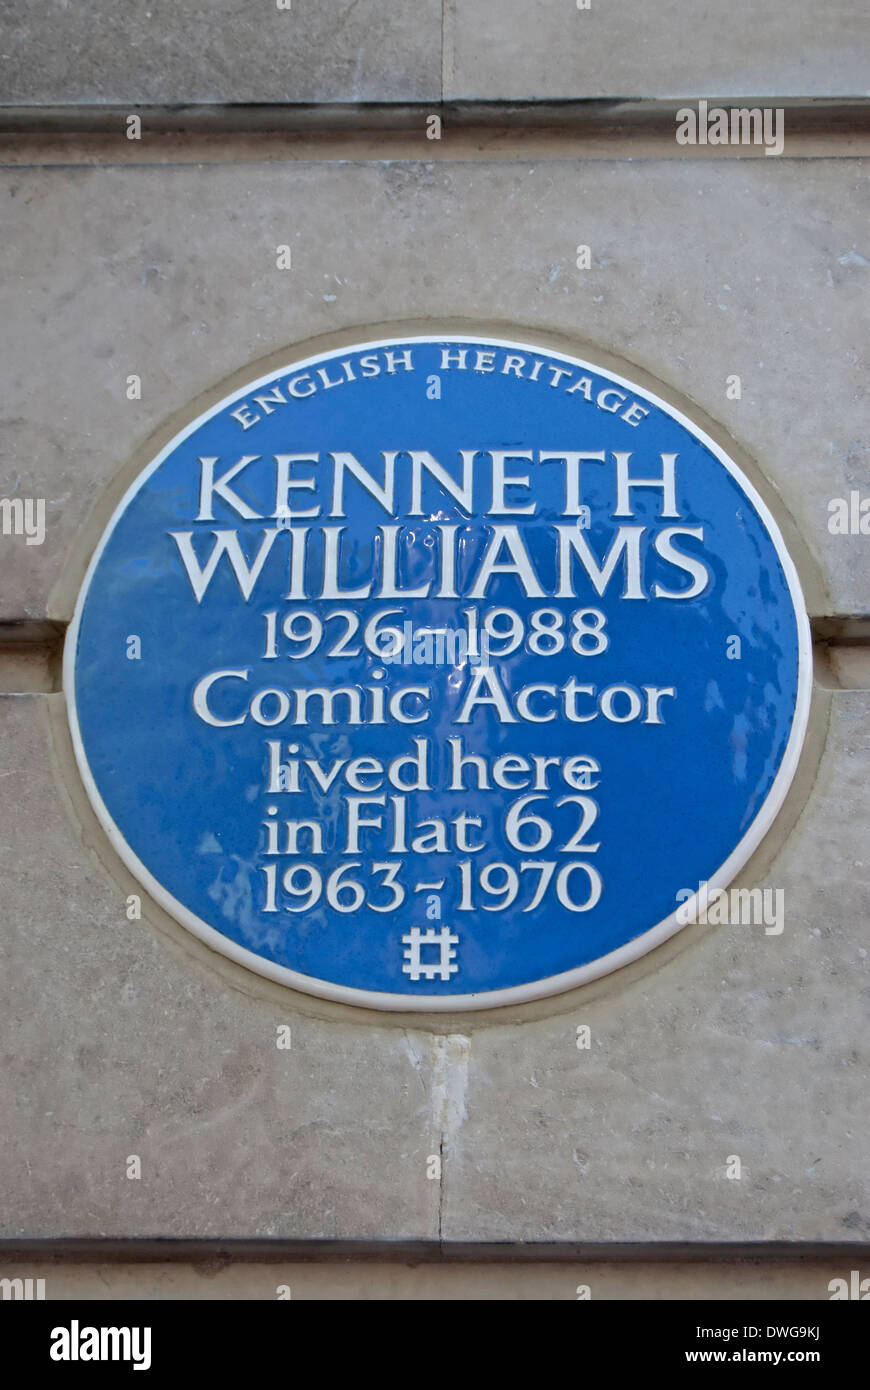 english heritage blue plaque marking a home of comic actor kenneth williams,  london, england Stock Photo